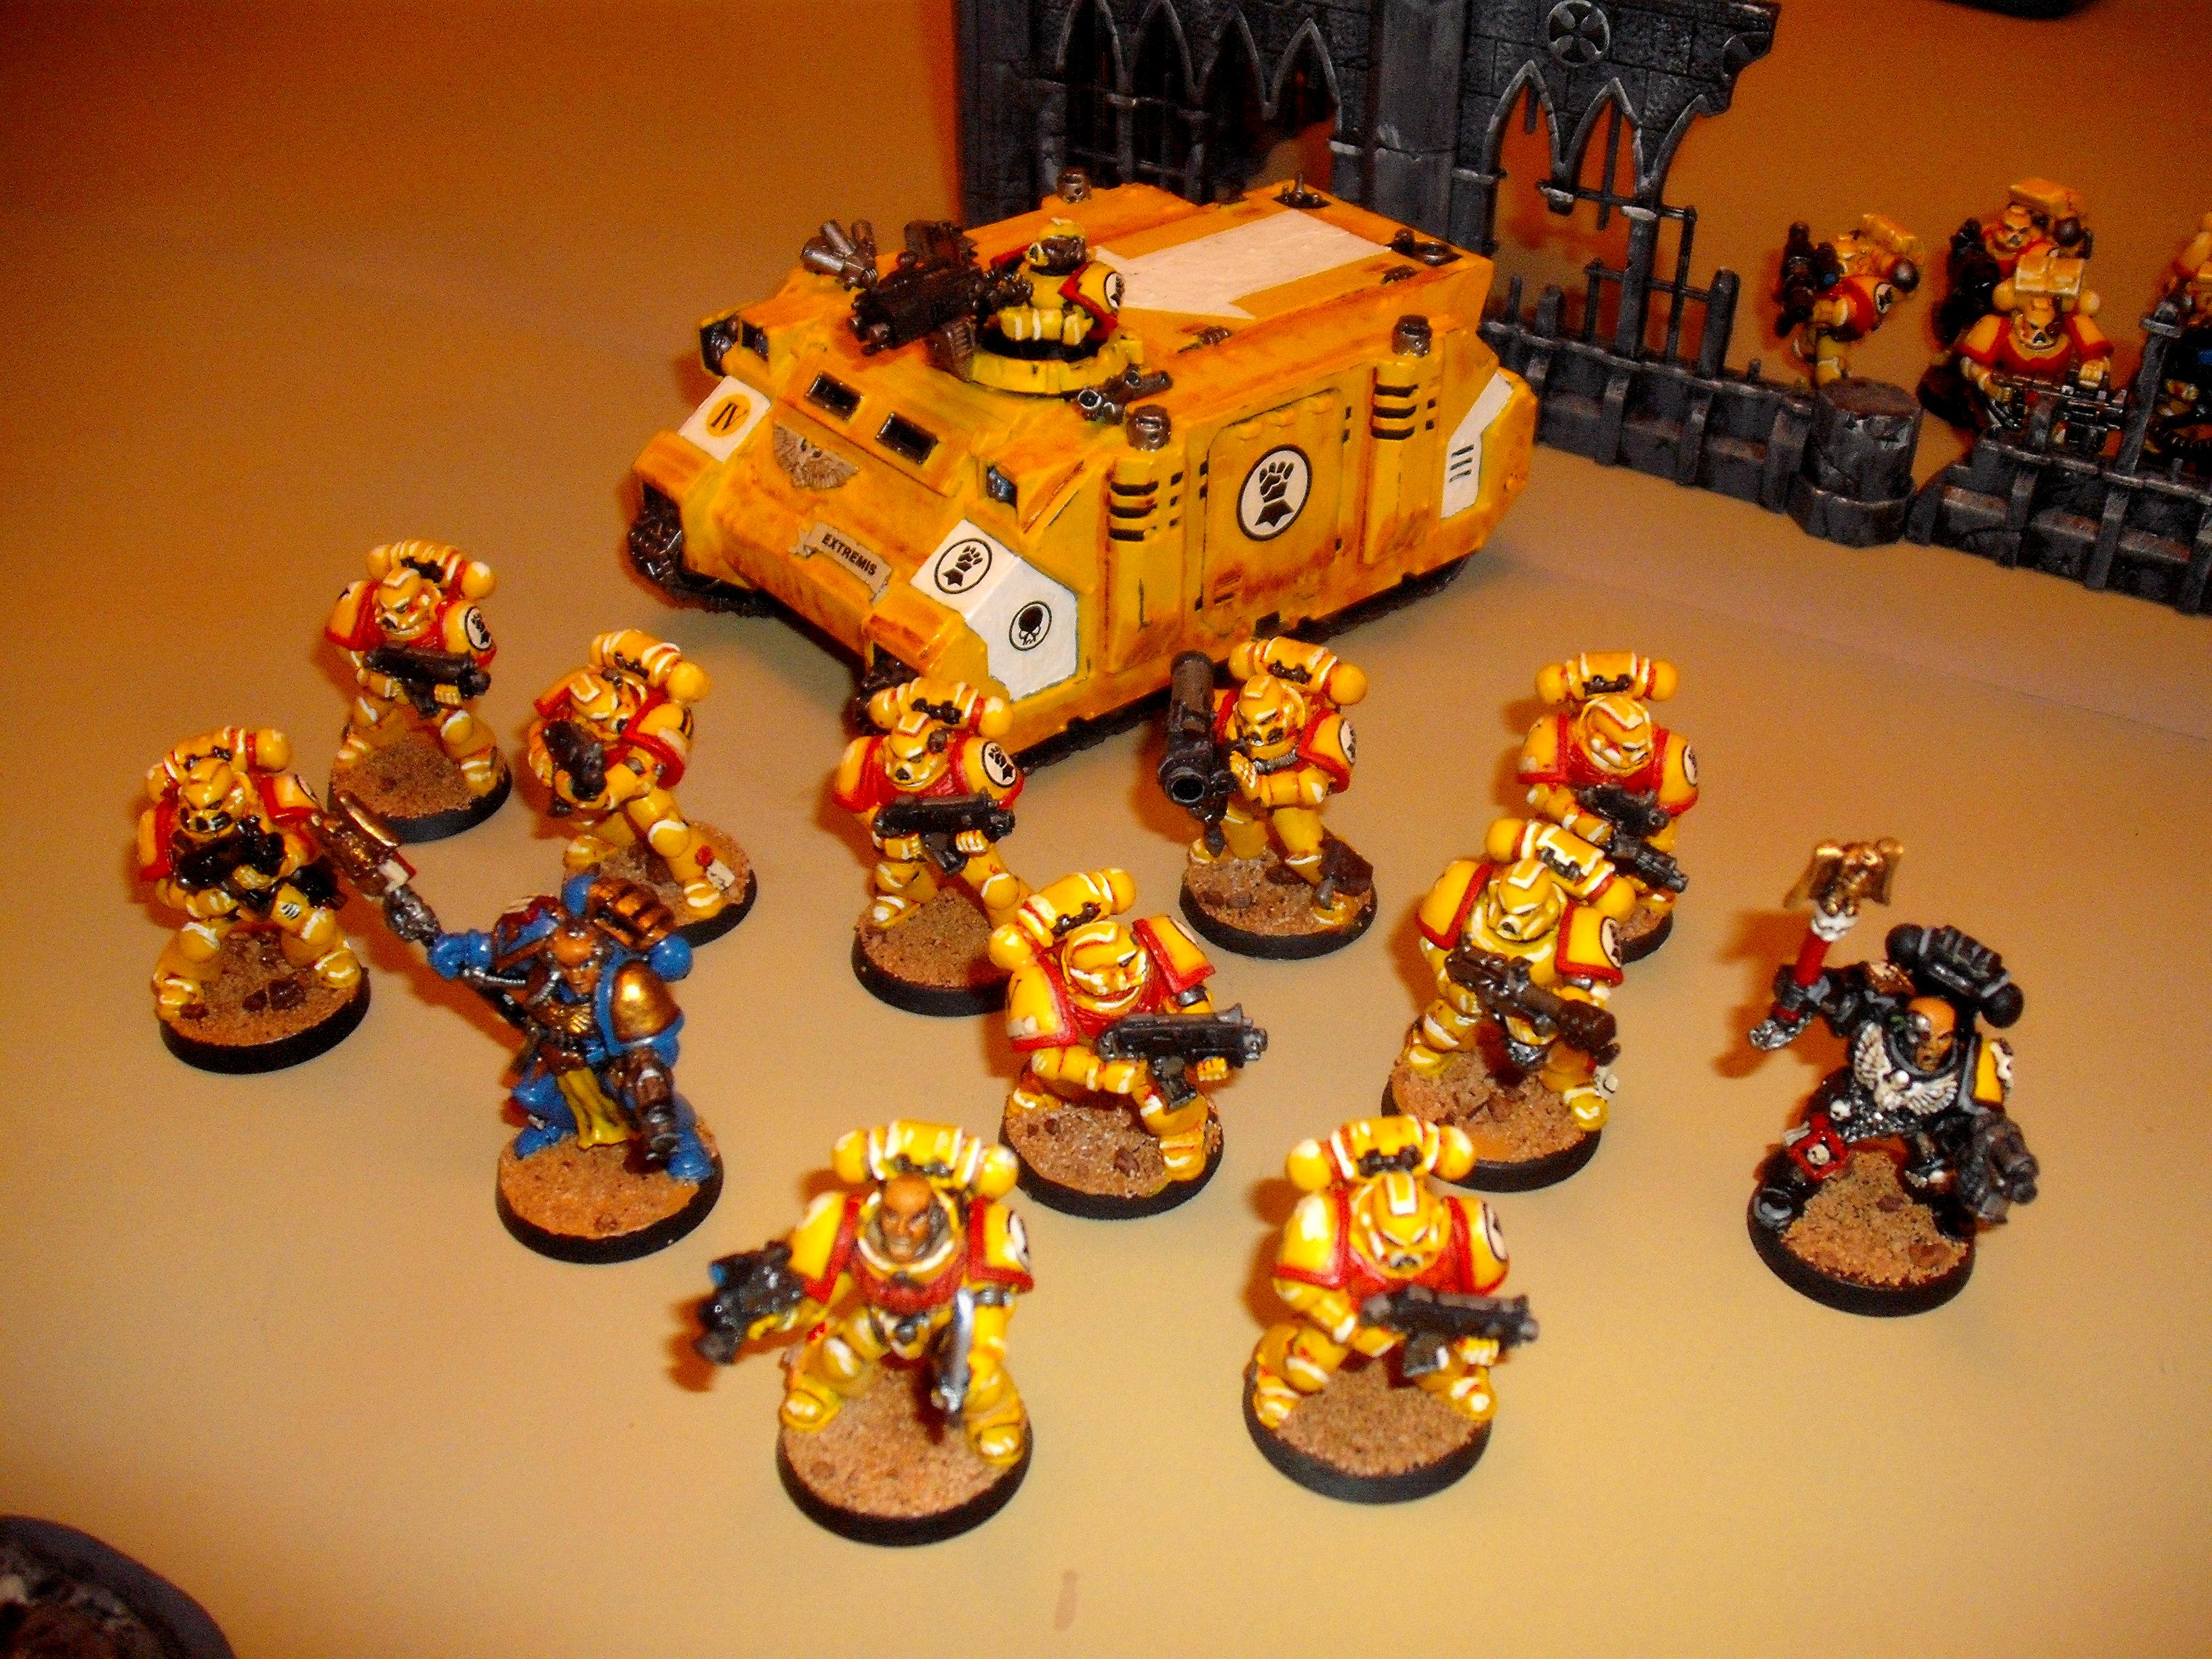 Chaplain, Imperial Fists Space Marines, Librarian, Rhino